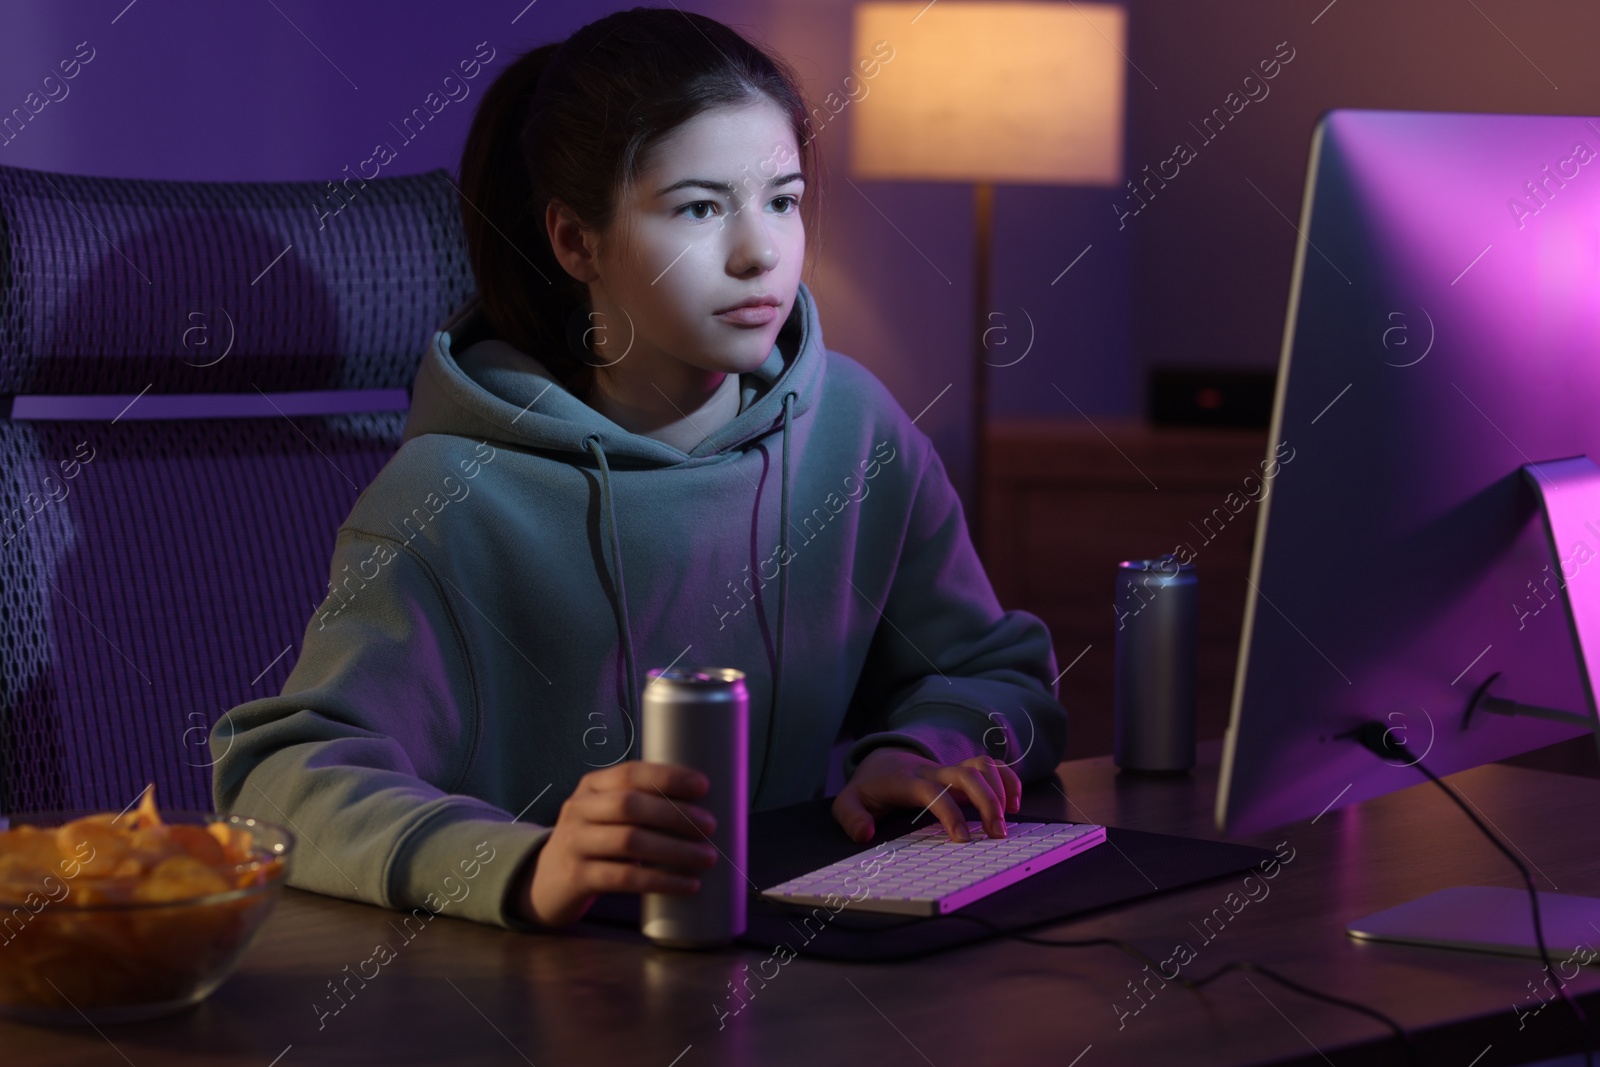 Photo of Girl with energy drink playing computer game at table in room